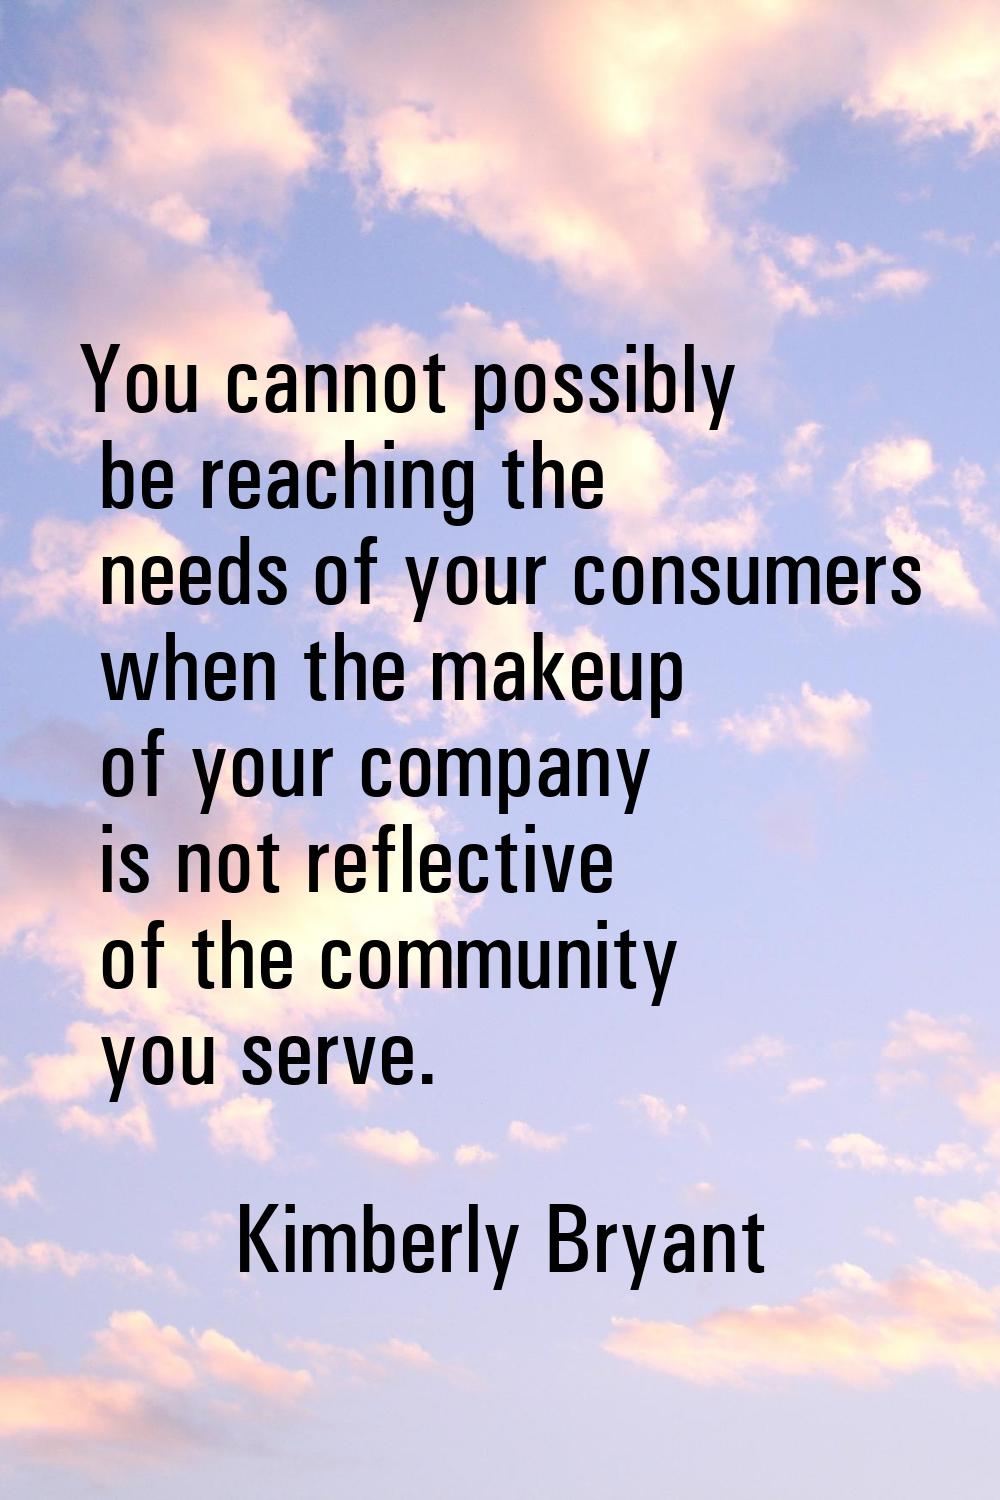 You cannot possibly be reaching the needs of your consumers when the makeup of your company is not 